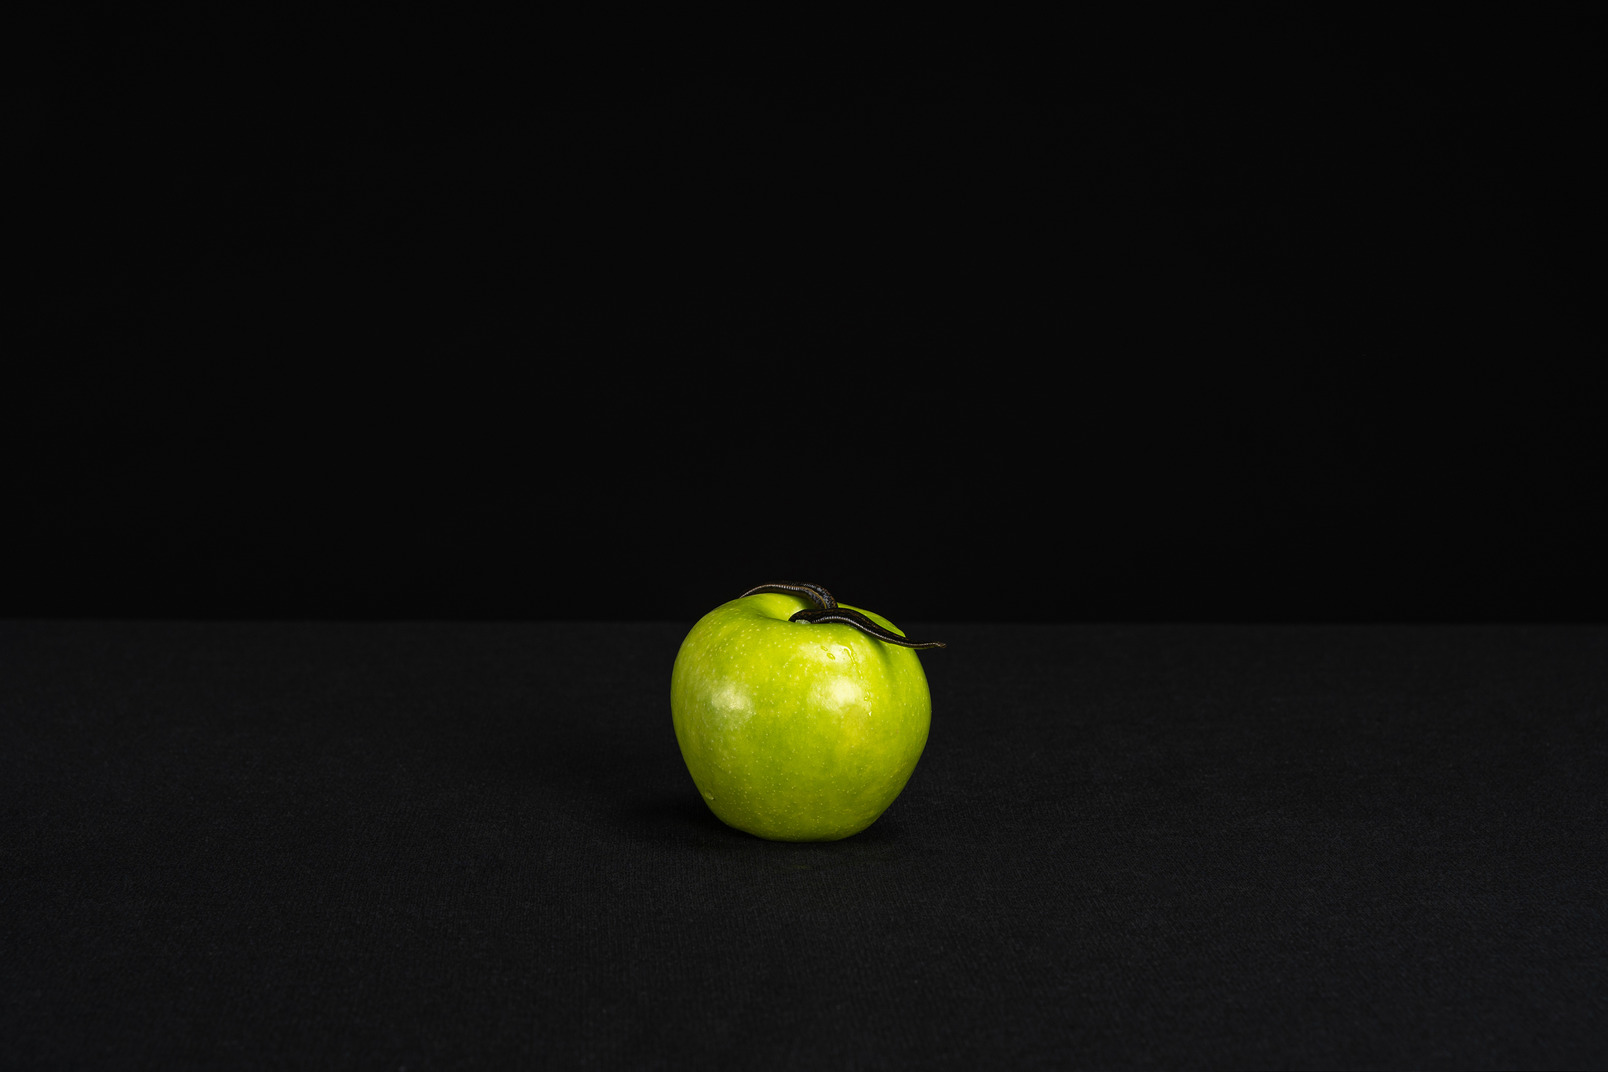 A lonely green apple in black background